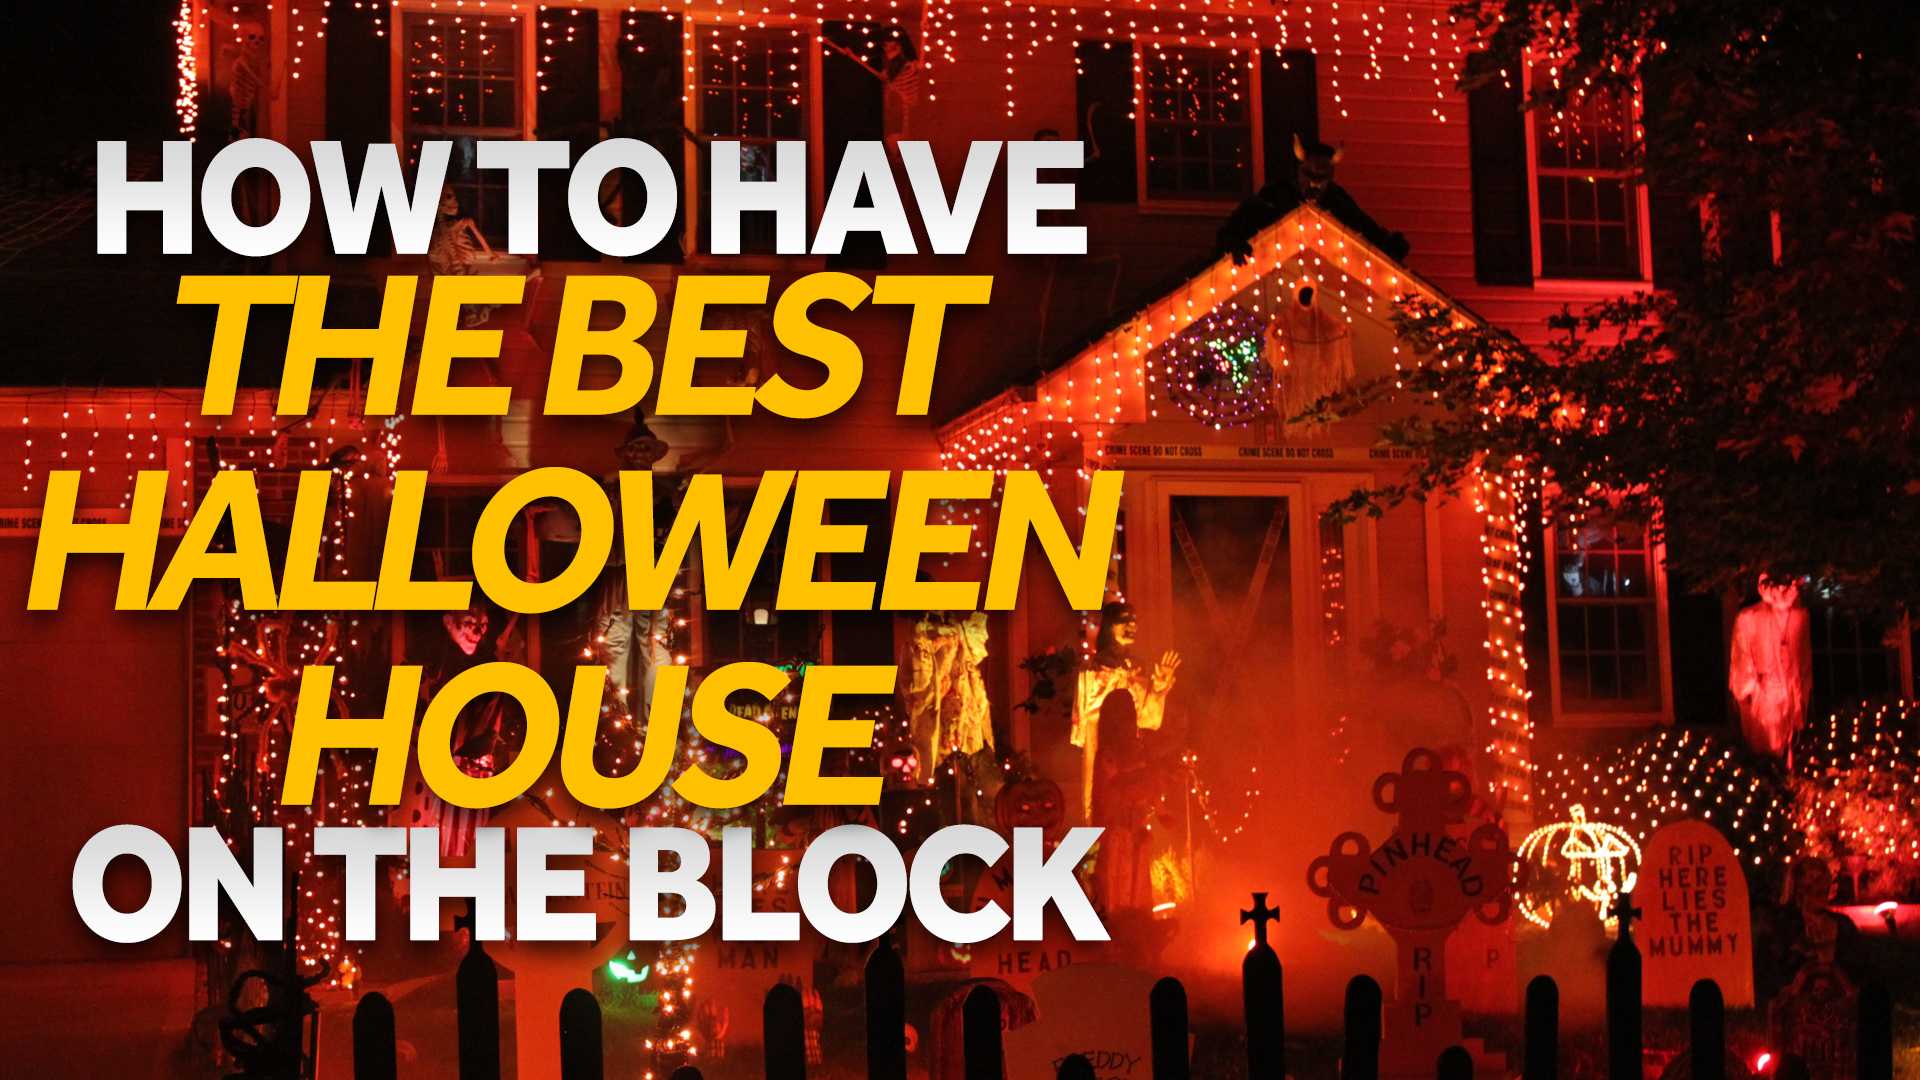 How to have the best Halloween house on the block